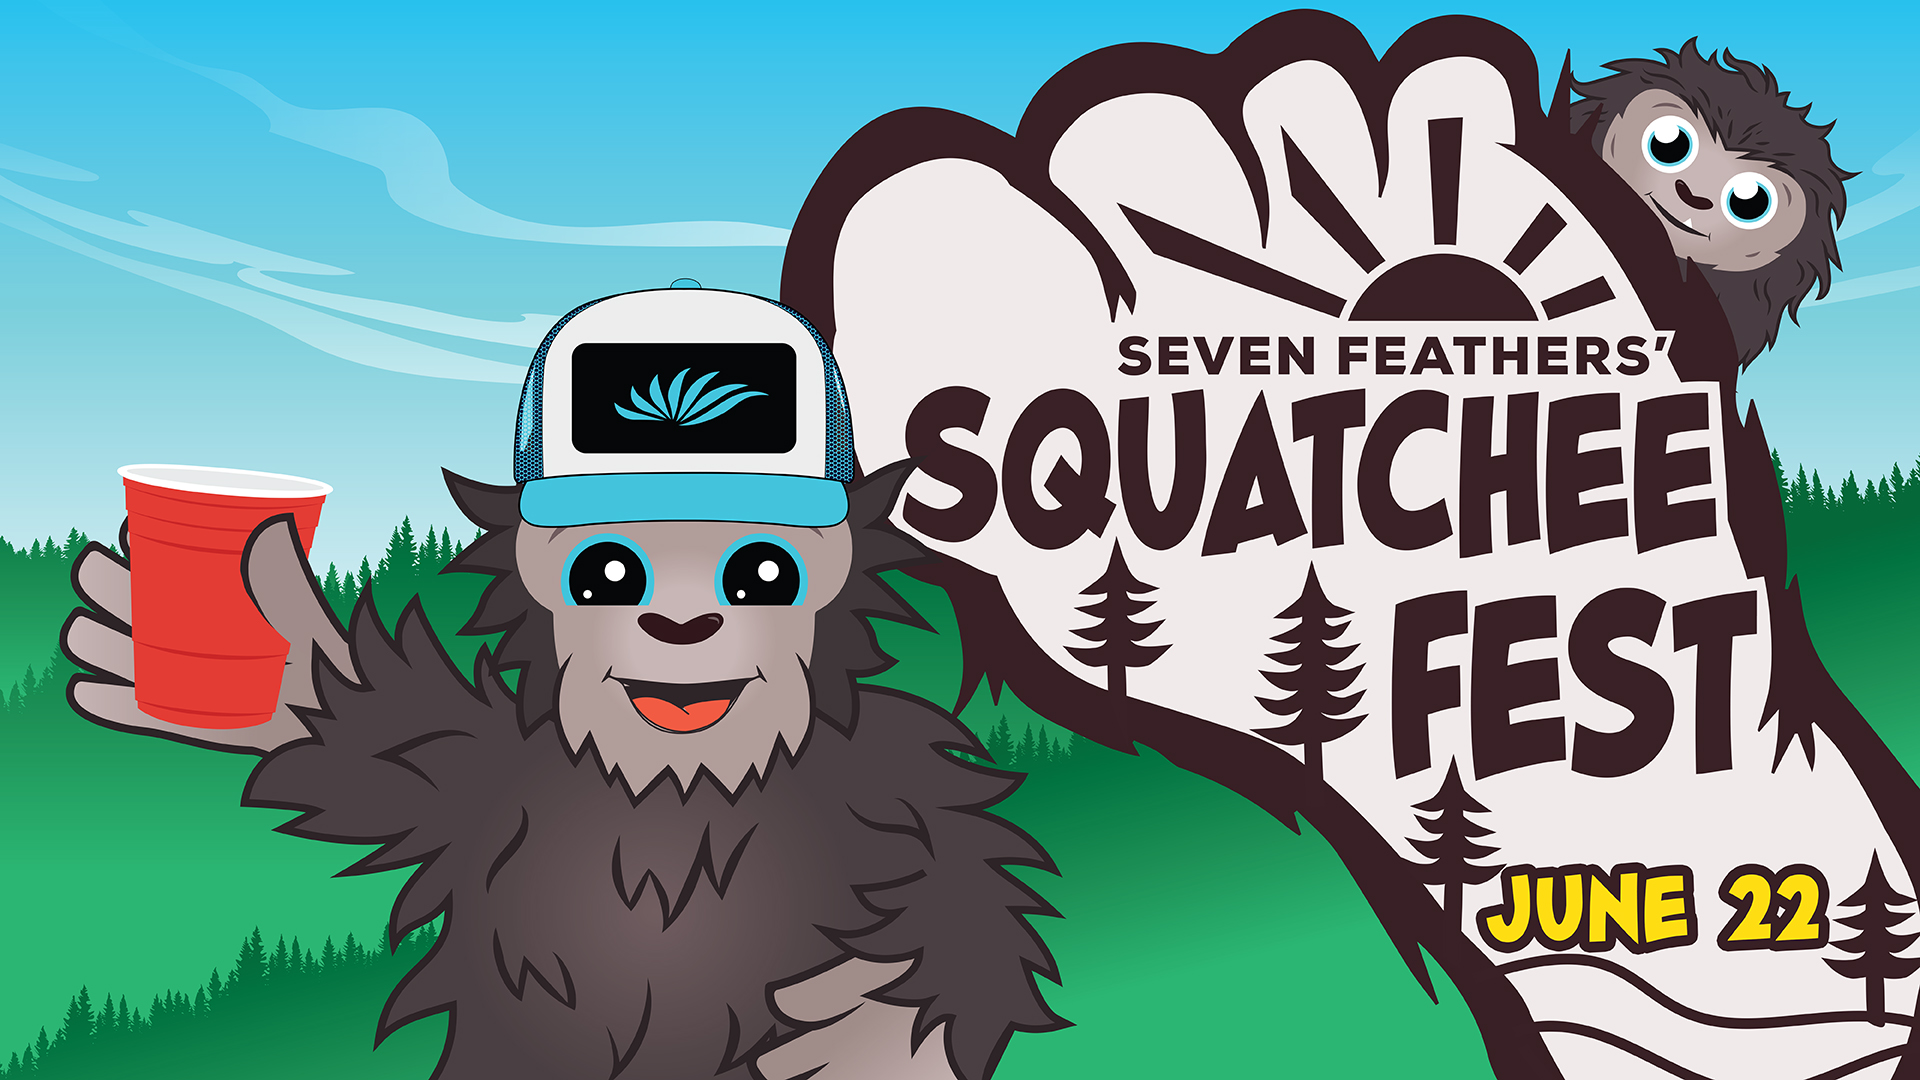 Squatchee Fest Returns To Seven Feathers Casino Resort This June 22nd In Canyonville Oregon